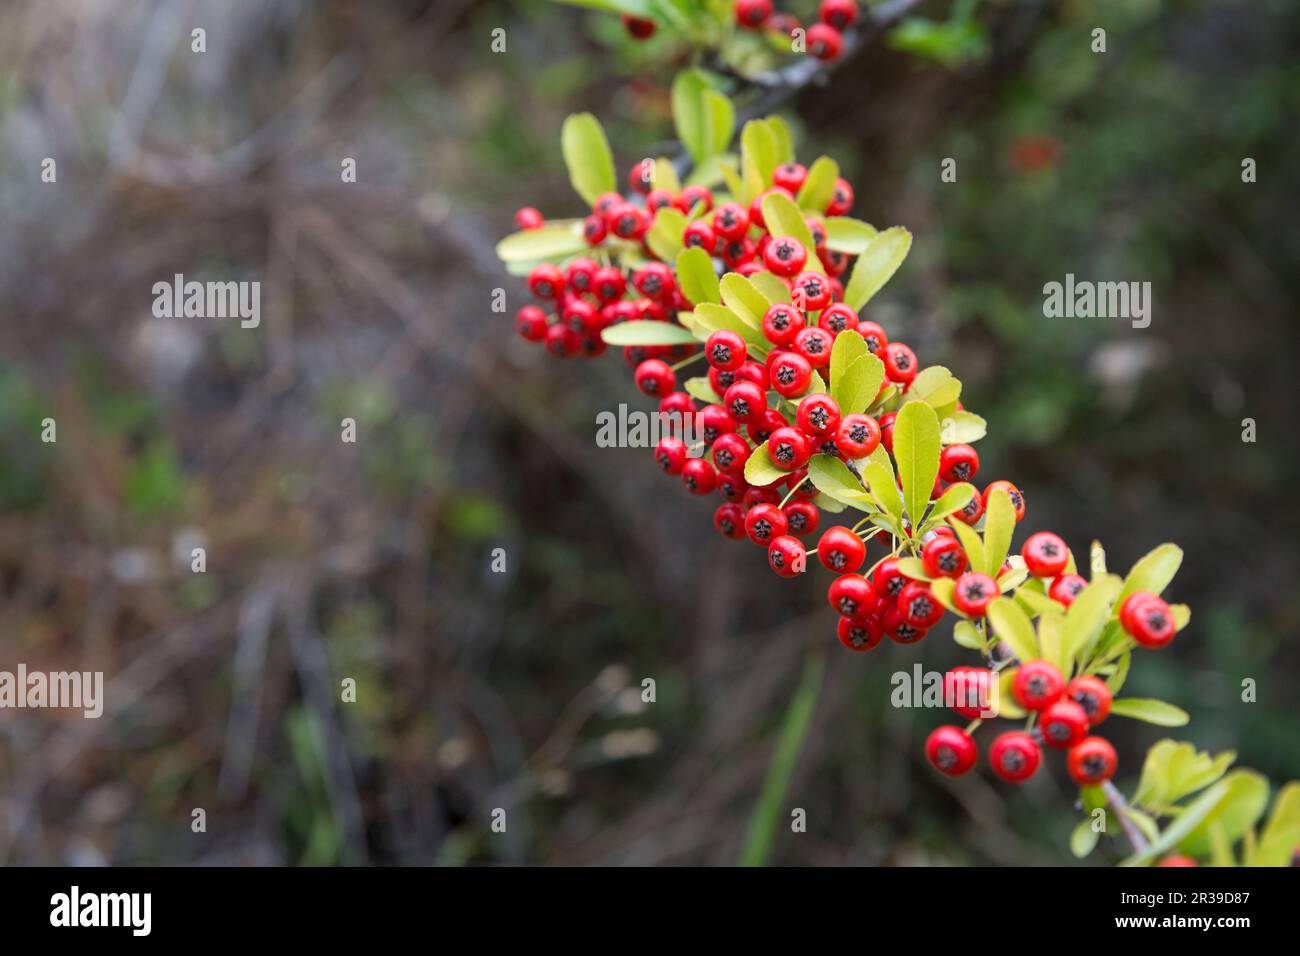 Berries of firethorn (Pyracantha) Stock Photo